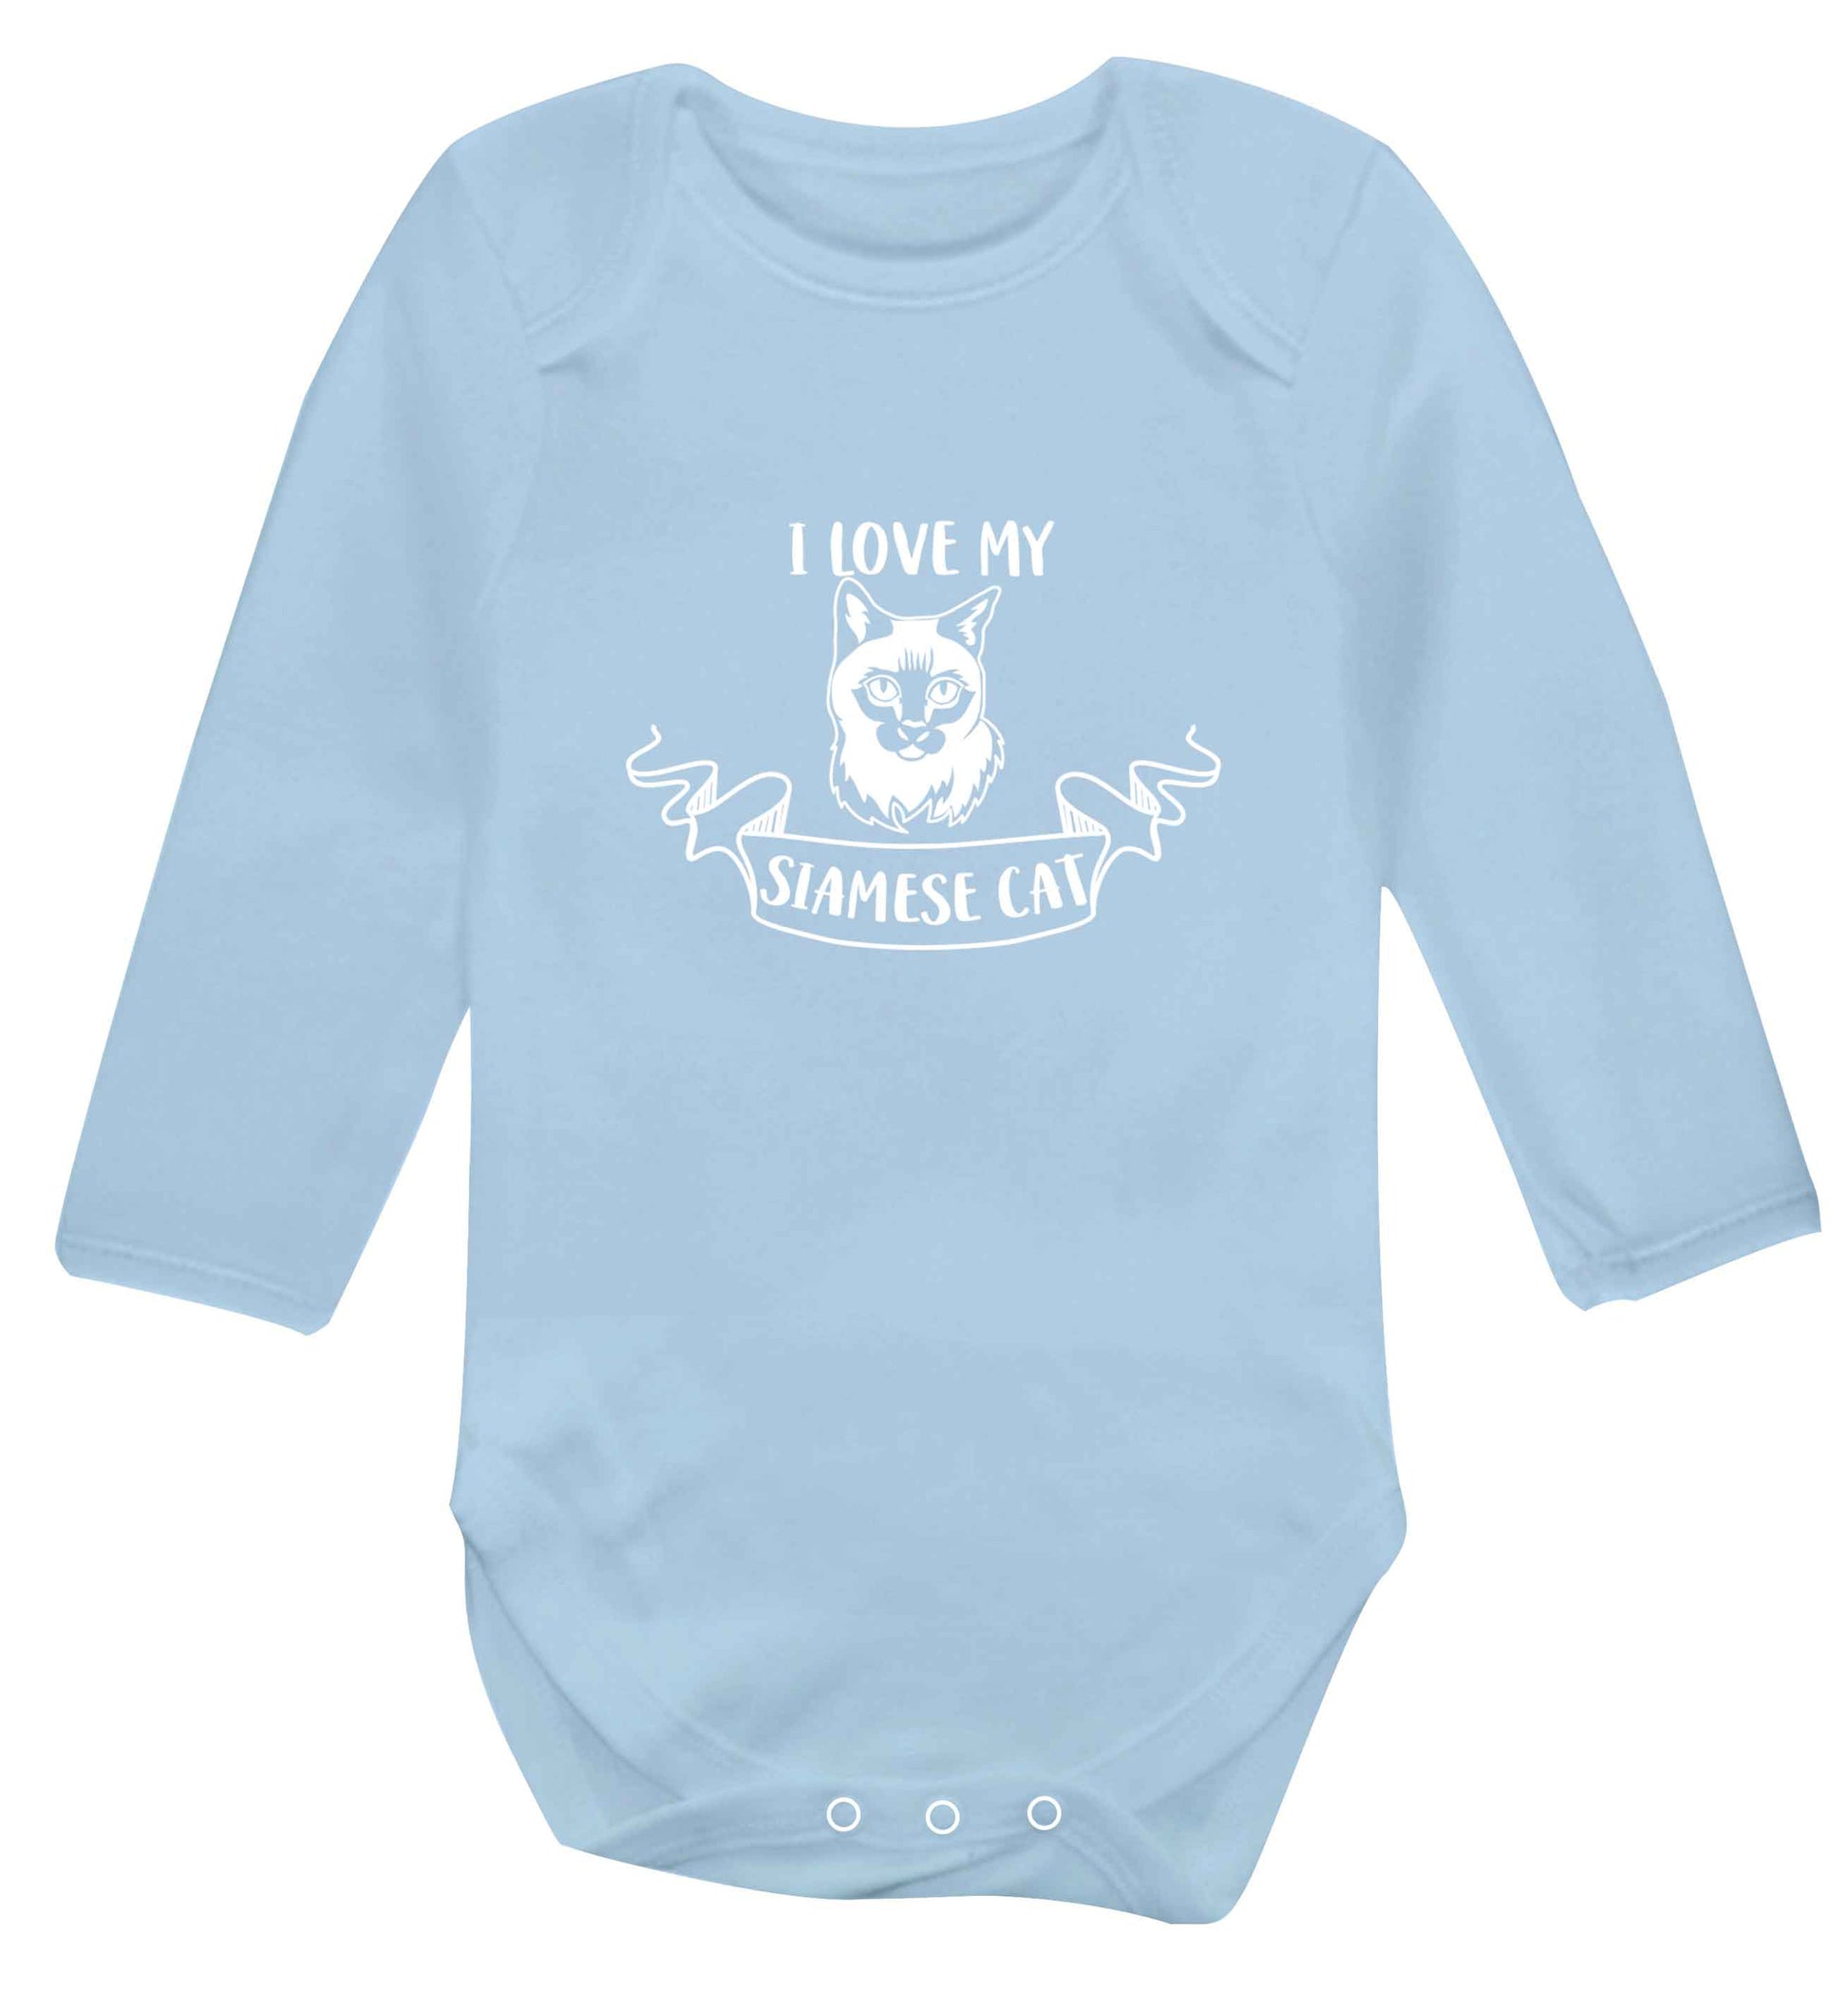 I love my siamese cat baby vest long sleeved pale blue 6-12 months